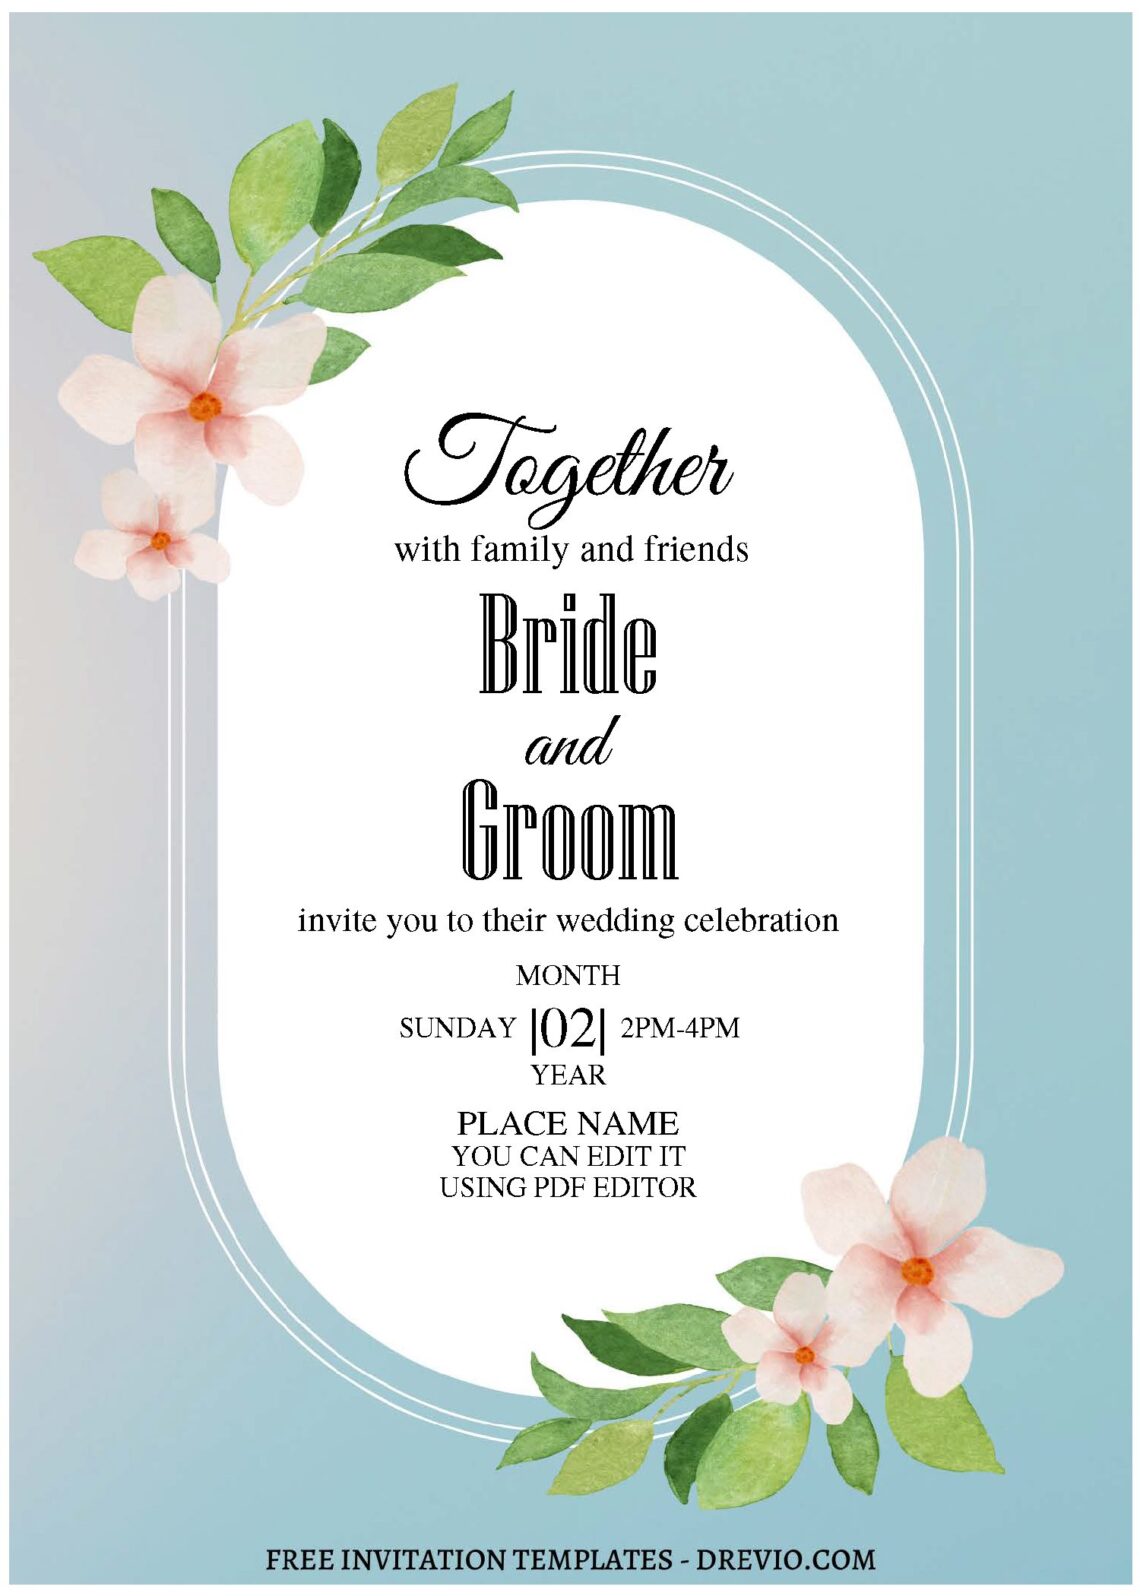 (Free Editable PDF) Soft & Muted Watercolor Floral Wedding Invitation Templates with aesthetic rose